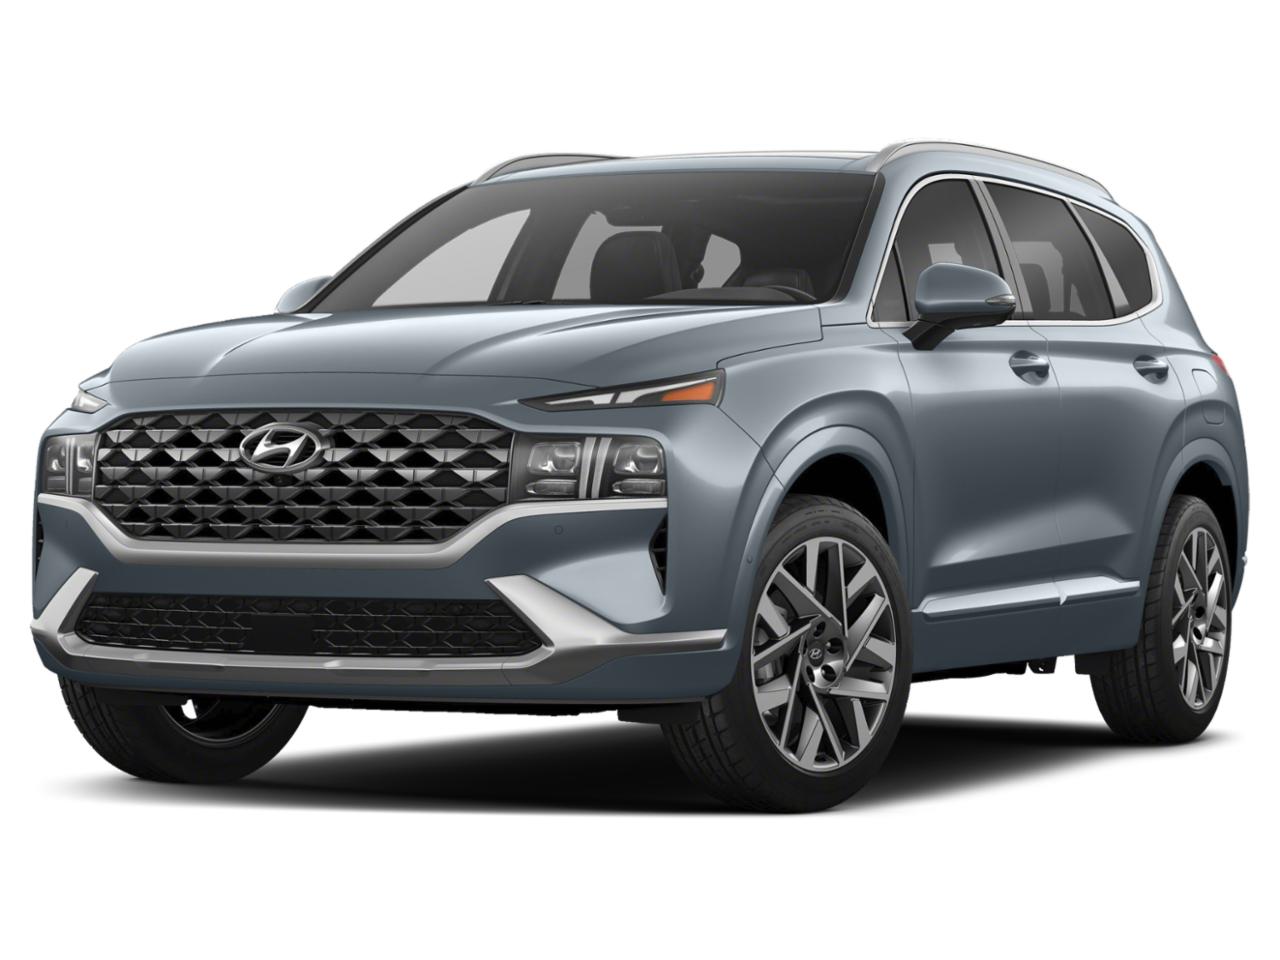 New 2021 Hyundai Santa Fe Limited FWD for Sale in Merrillville ...